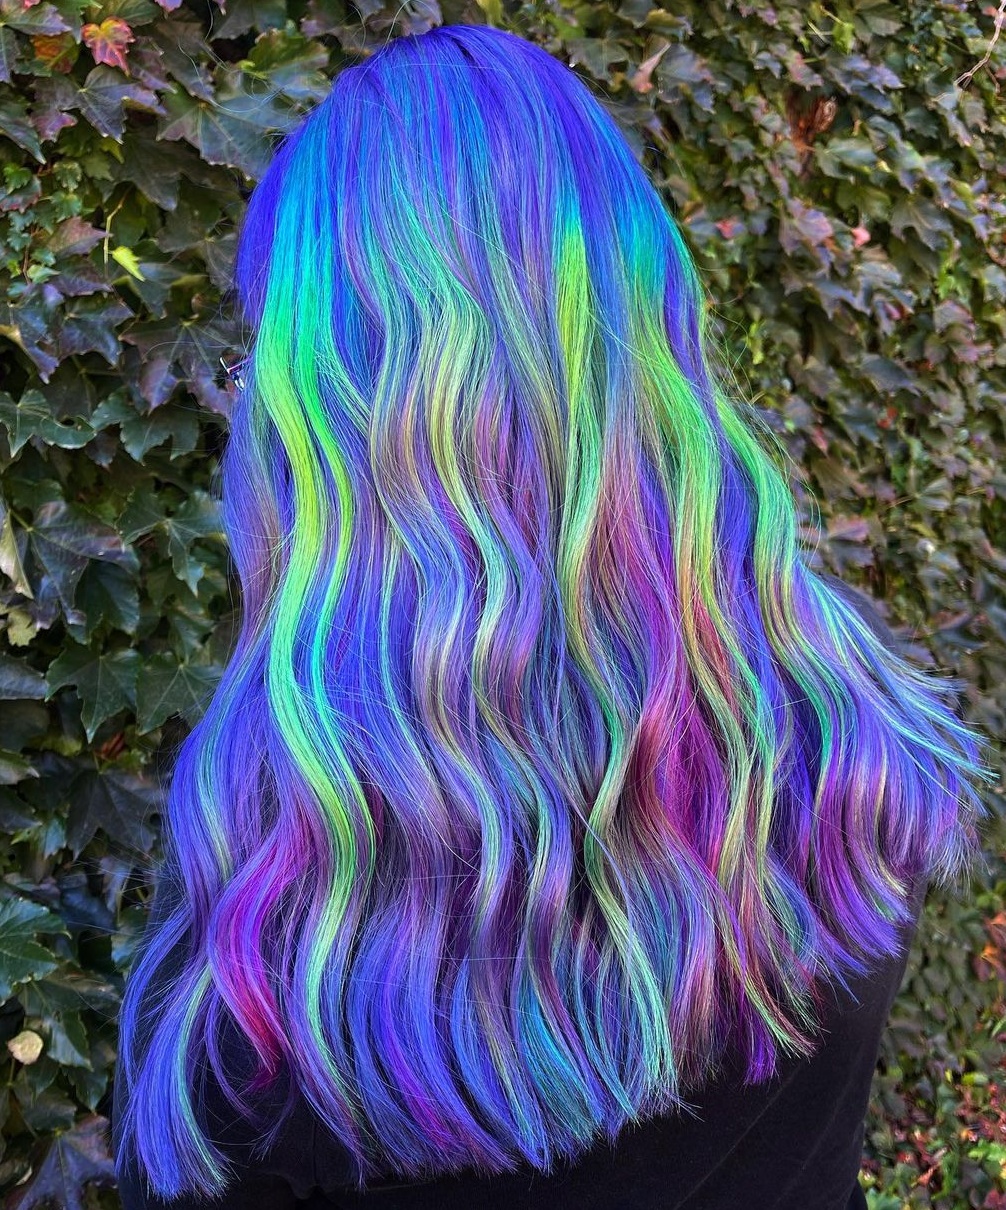 Bright Blue and Green Galaxy Colors on Long Hair